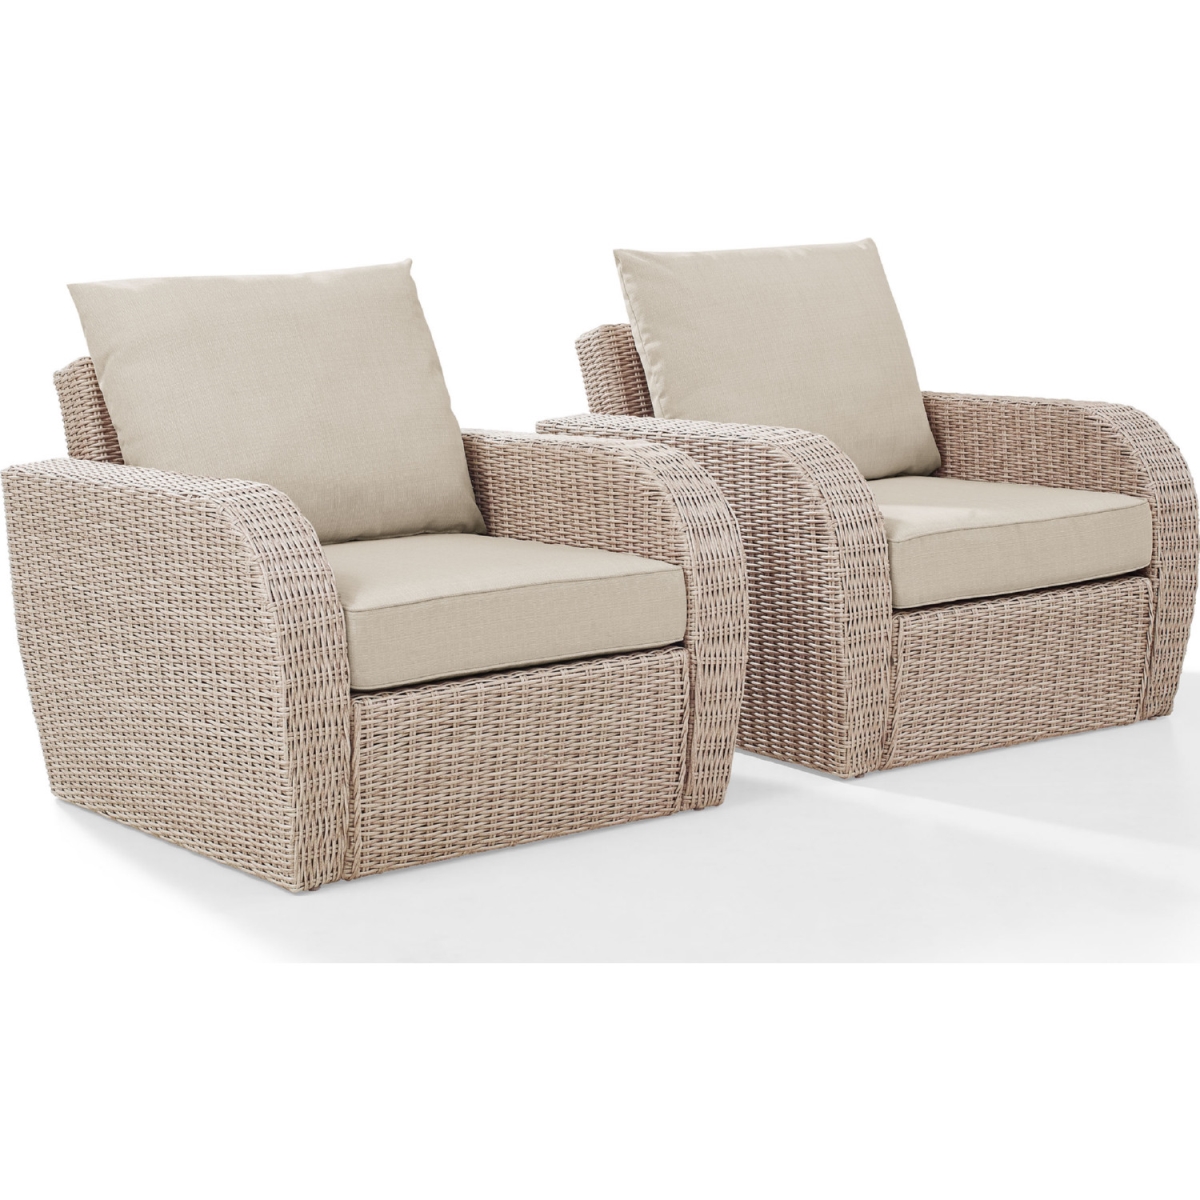 Ko70136wh-ol 2 Piece St. Augustine Outdoor Wicker Seating Set With Oatmeal Cushion - Two Outdoor Wicker Chairs